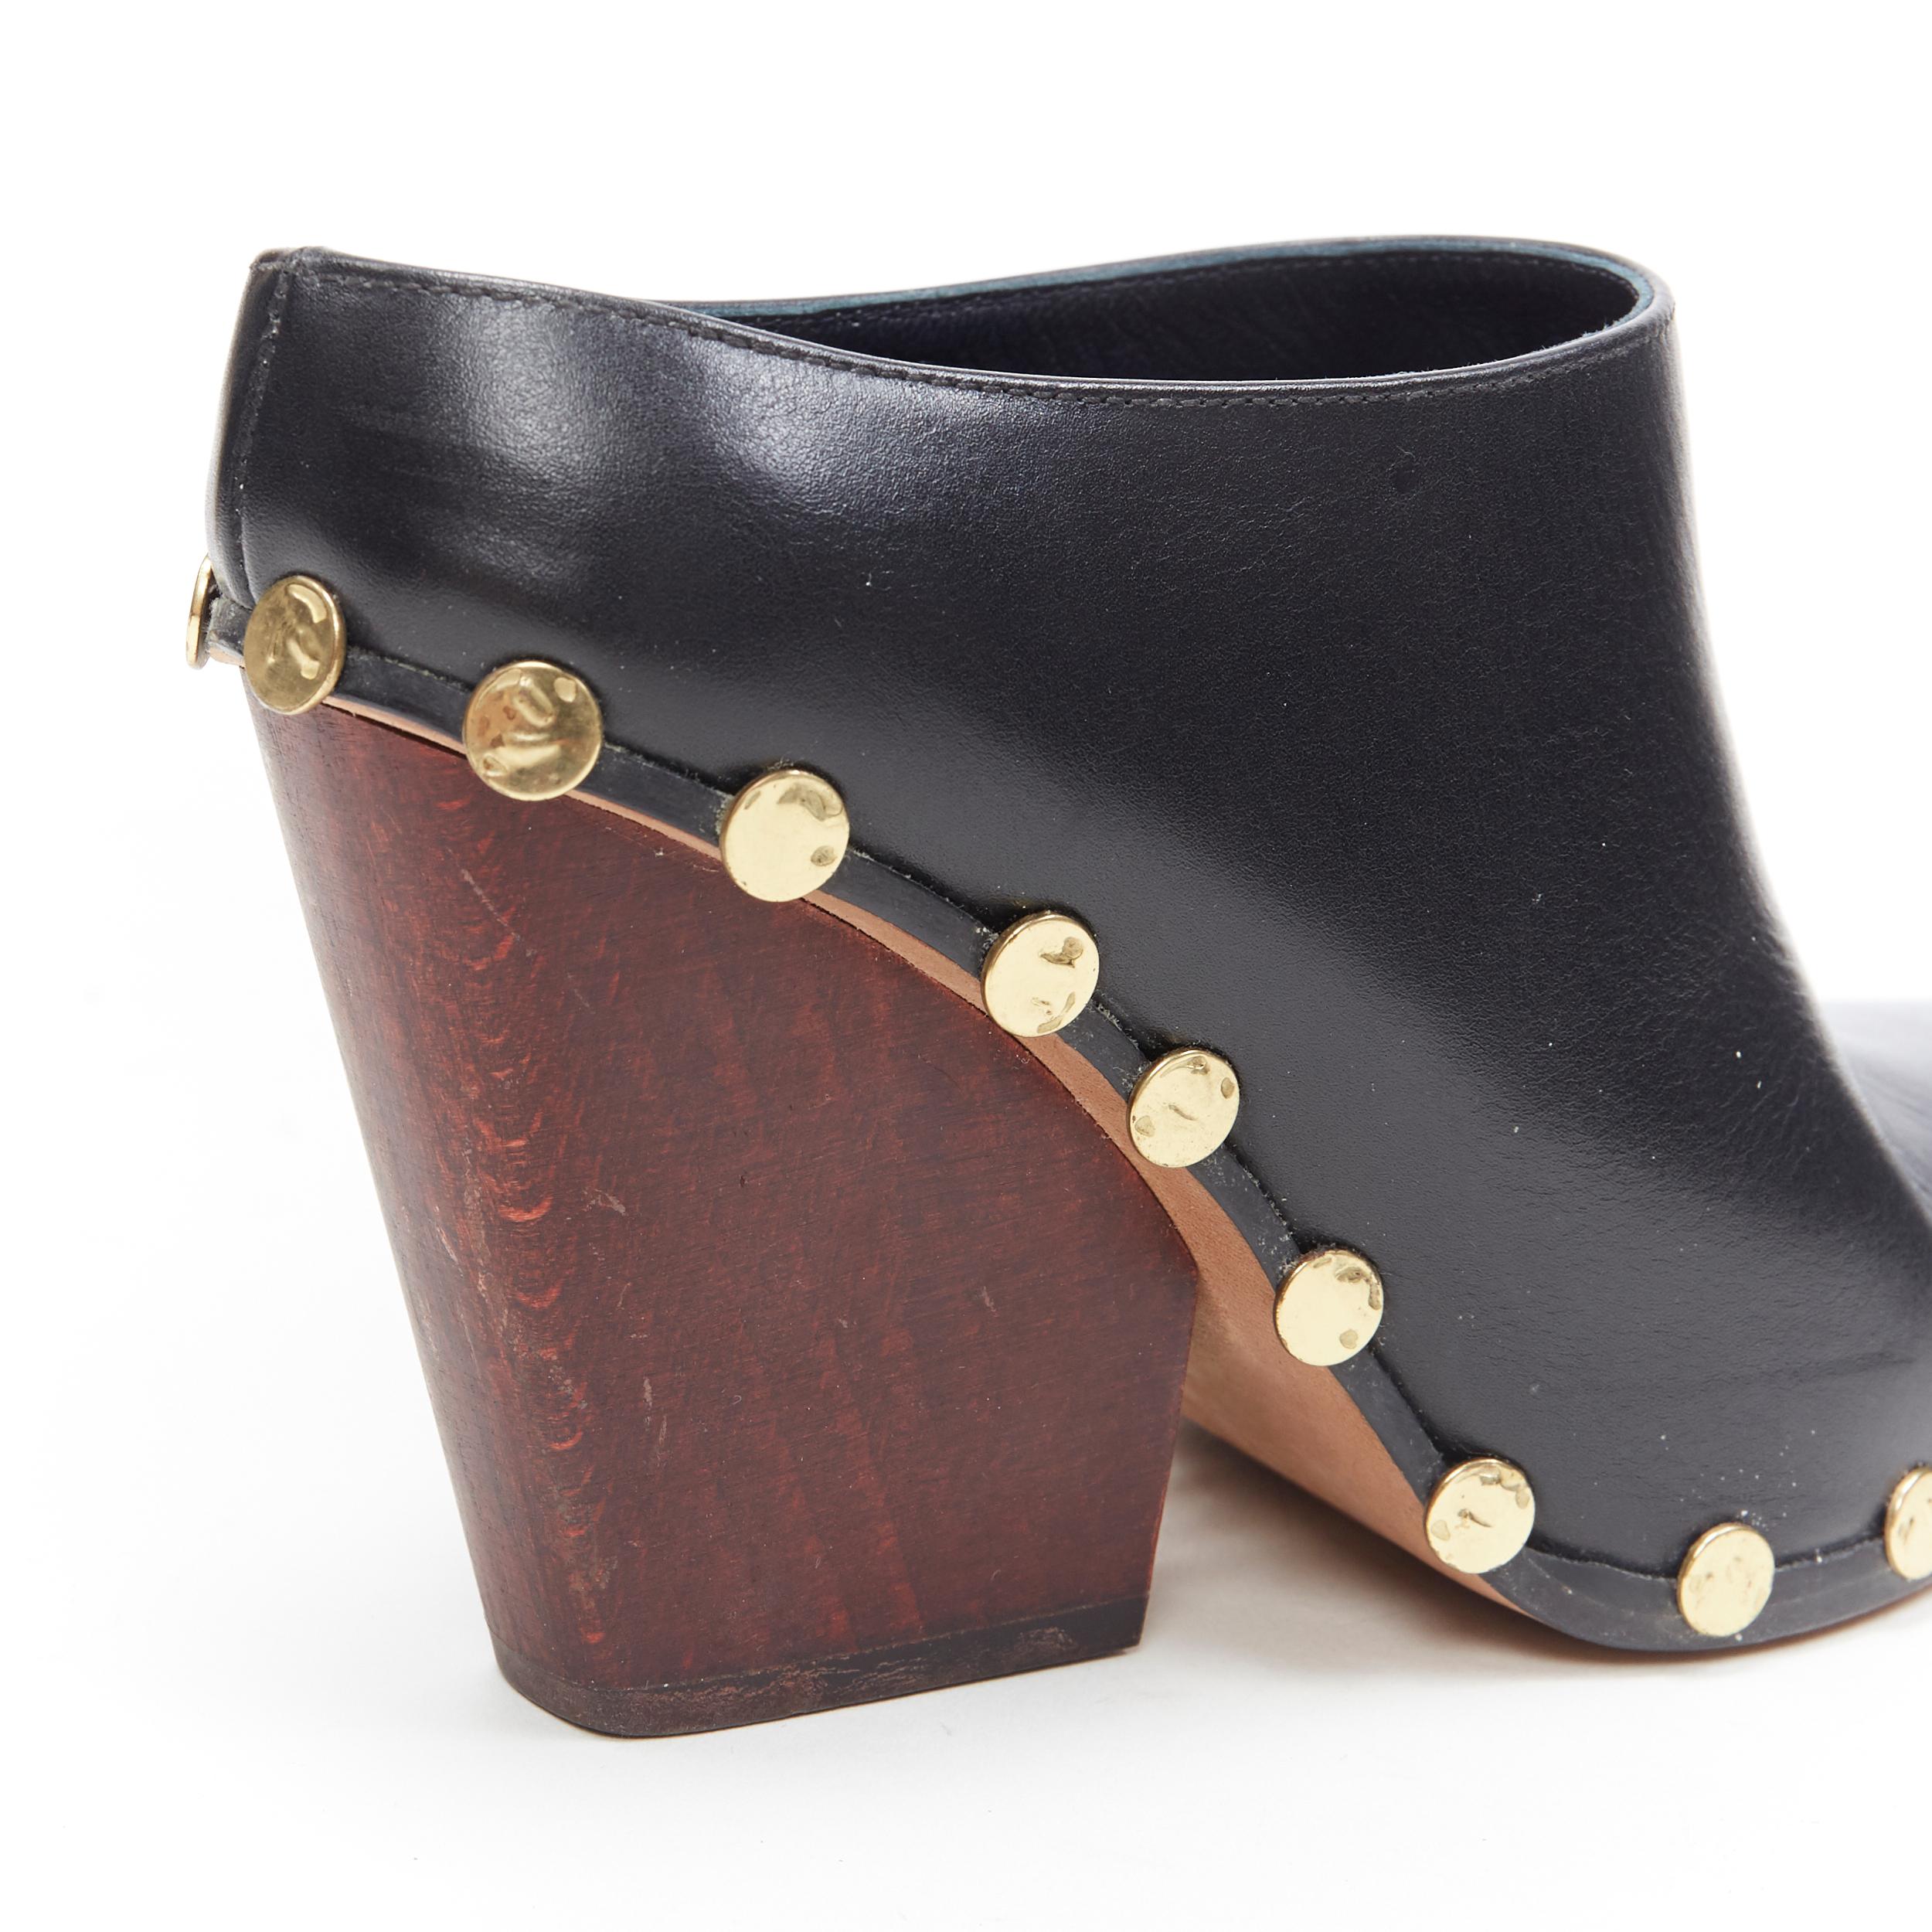 CELINE PHOEBE PHILO Rodeo High black leather point toe gold stud mule EU37
Brand: Celine
Designer: Phoebe Philo
Model Name / Style: Rodei High
Material: Leather
Color: Black
Pattern: Solid
Closure: Slip on
Lining material: Leather
Extra Detail: High